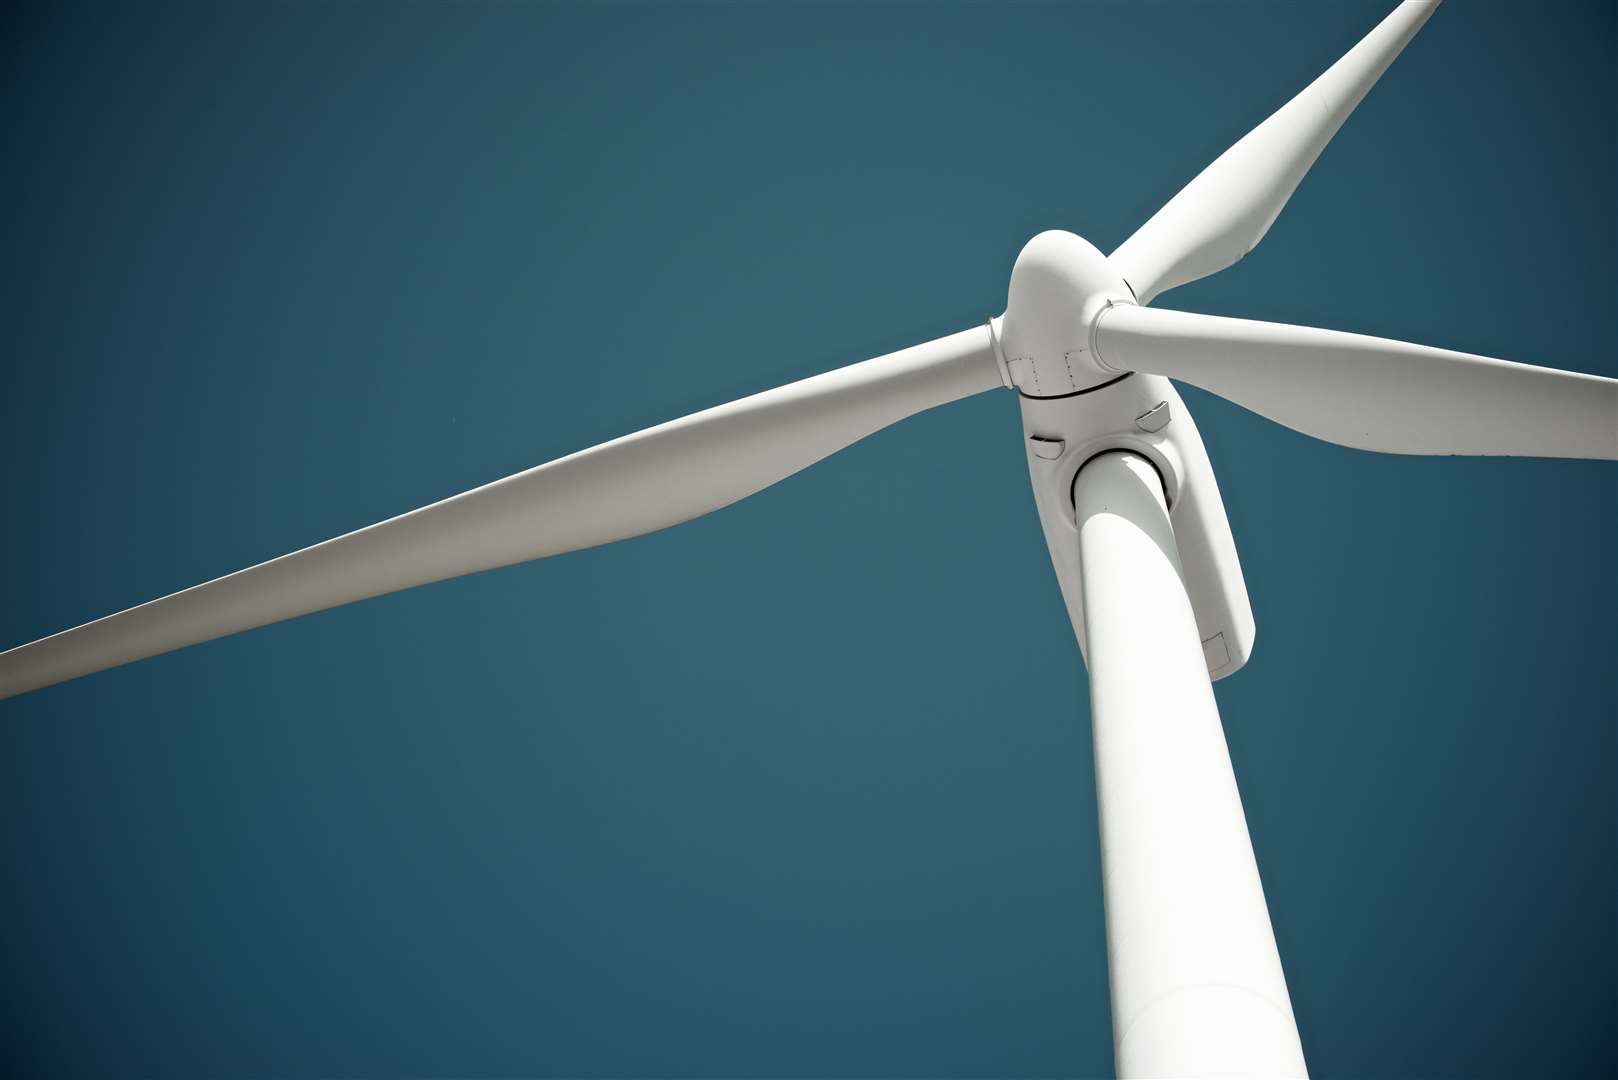 Highland councillors gave Sallachy Wind Farm the go-ahead at a recent planning committee meeting.